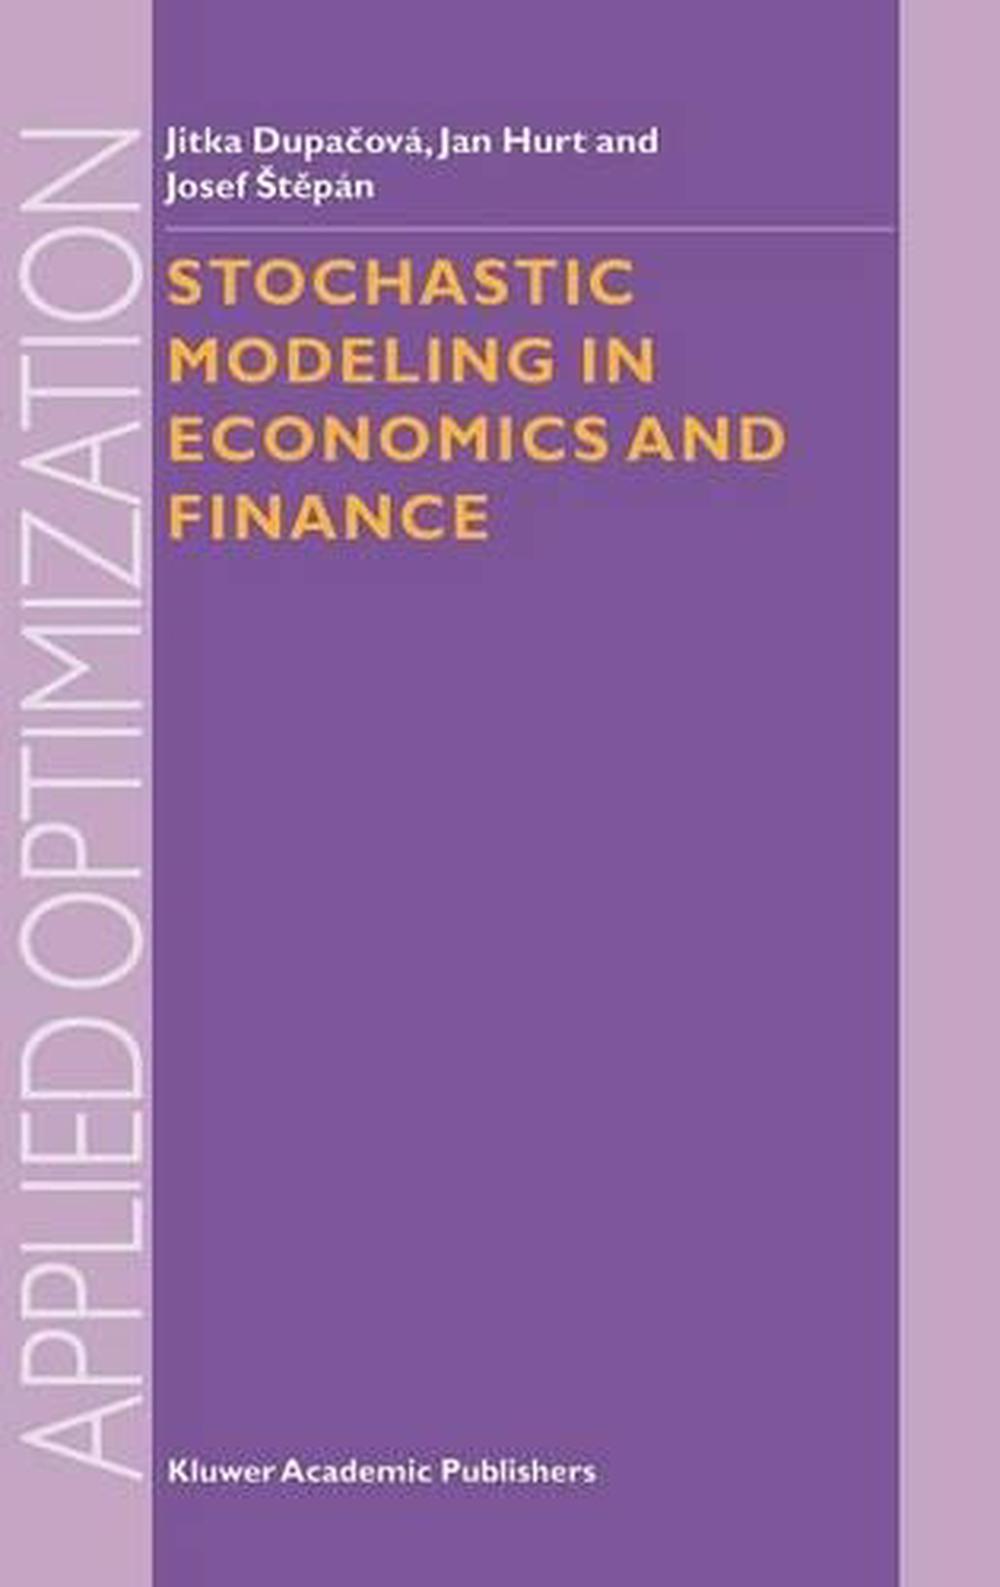 Stochastic Modeling in Economics and Finance by Jitka Dupacova (English